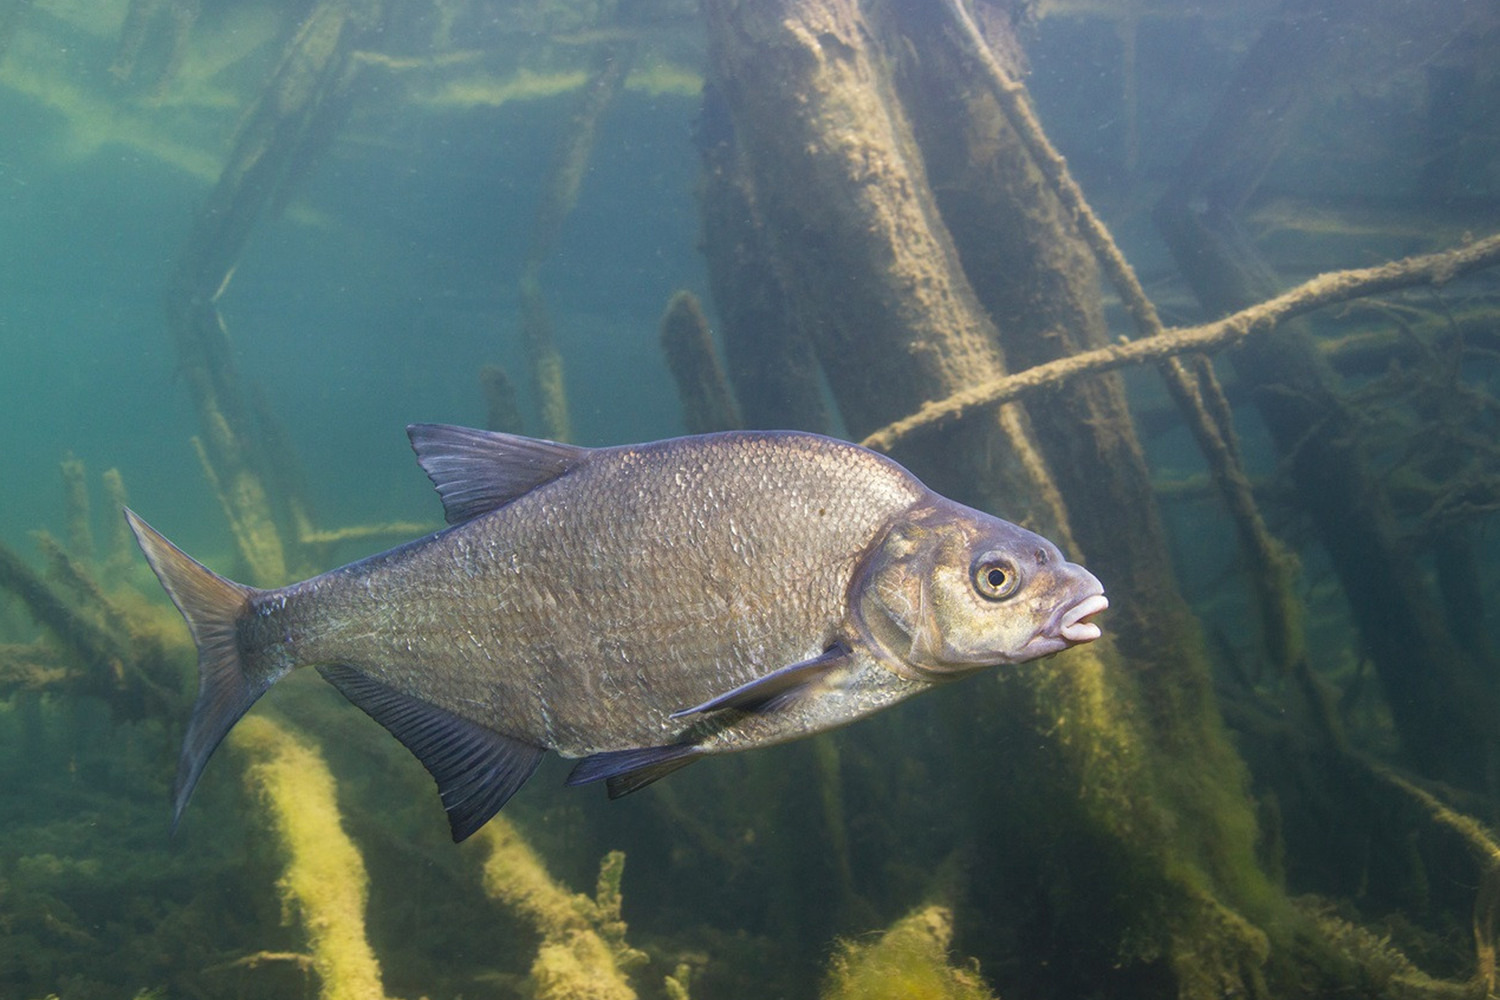 Ground set for bream - a guide for beginners